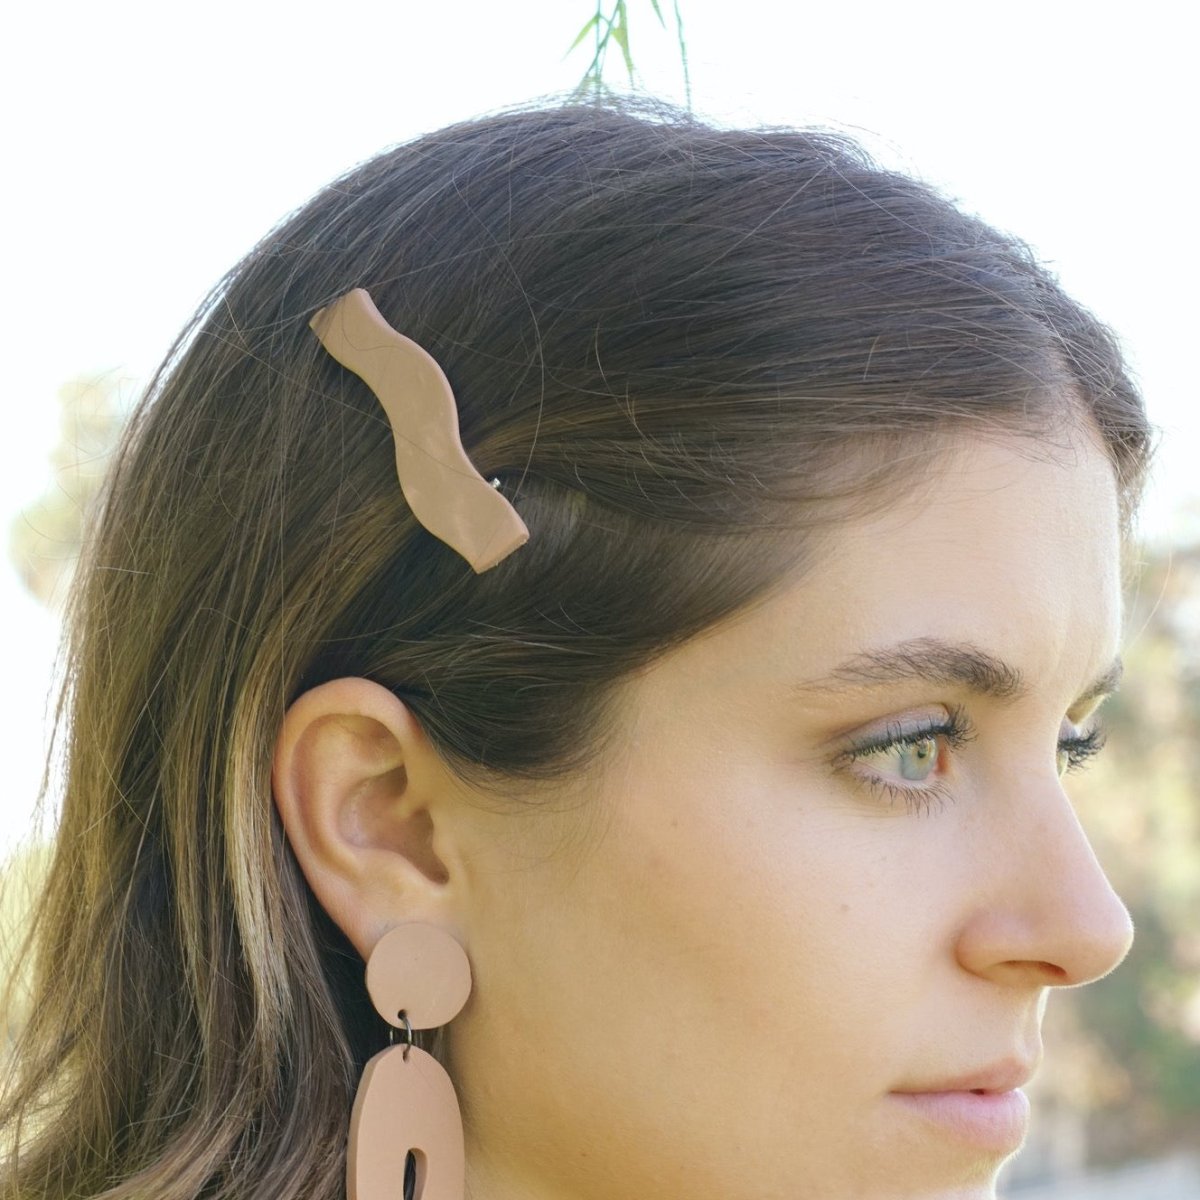 Wave shaped hair clip in the shade Desert. Hair clip is displayed on a model with light brown hair. Made in Los Angeles, California by Hey Moon Designs.